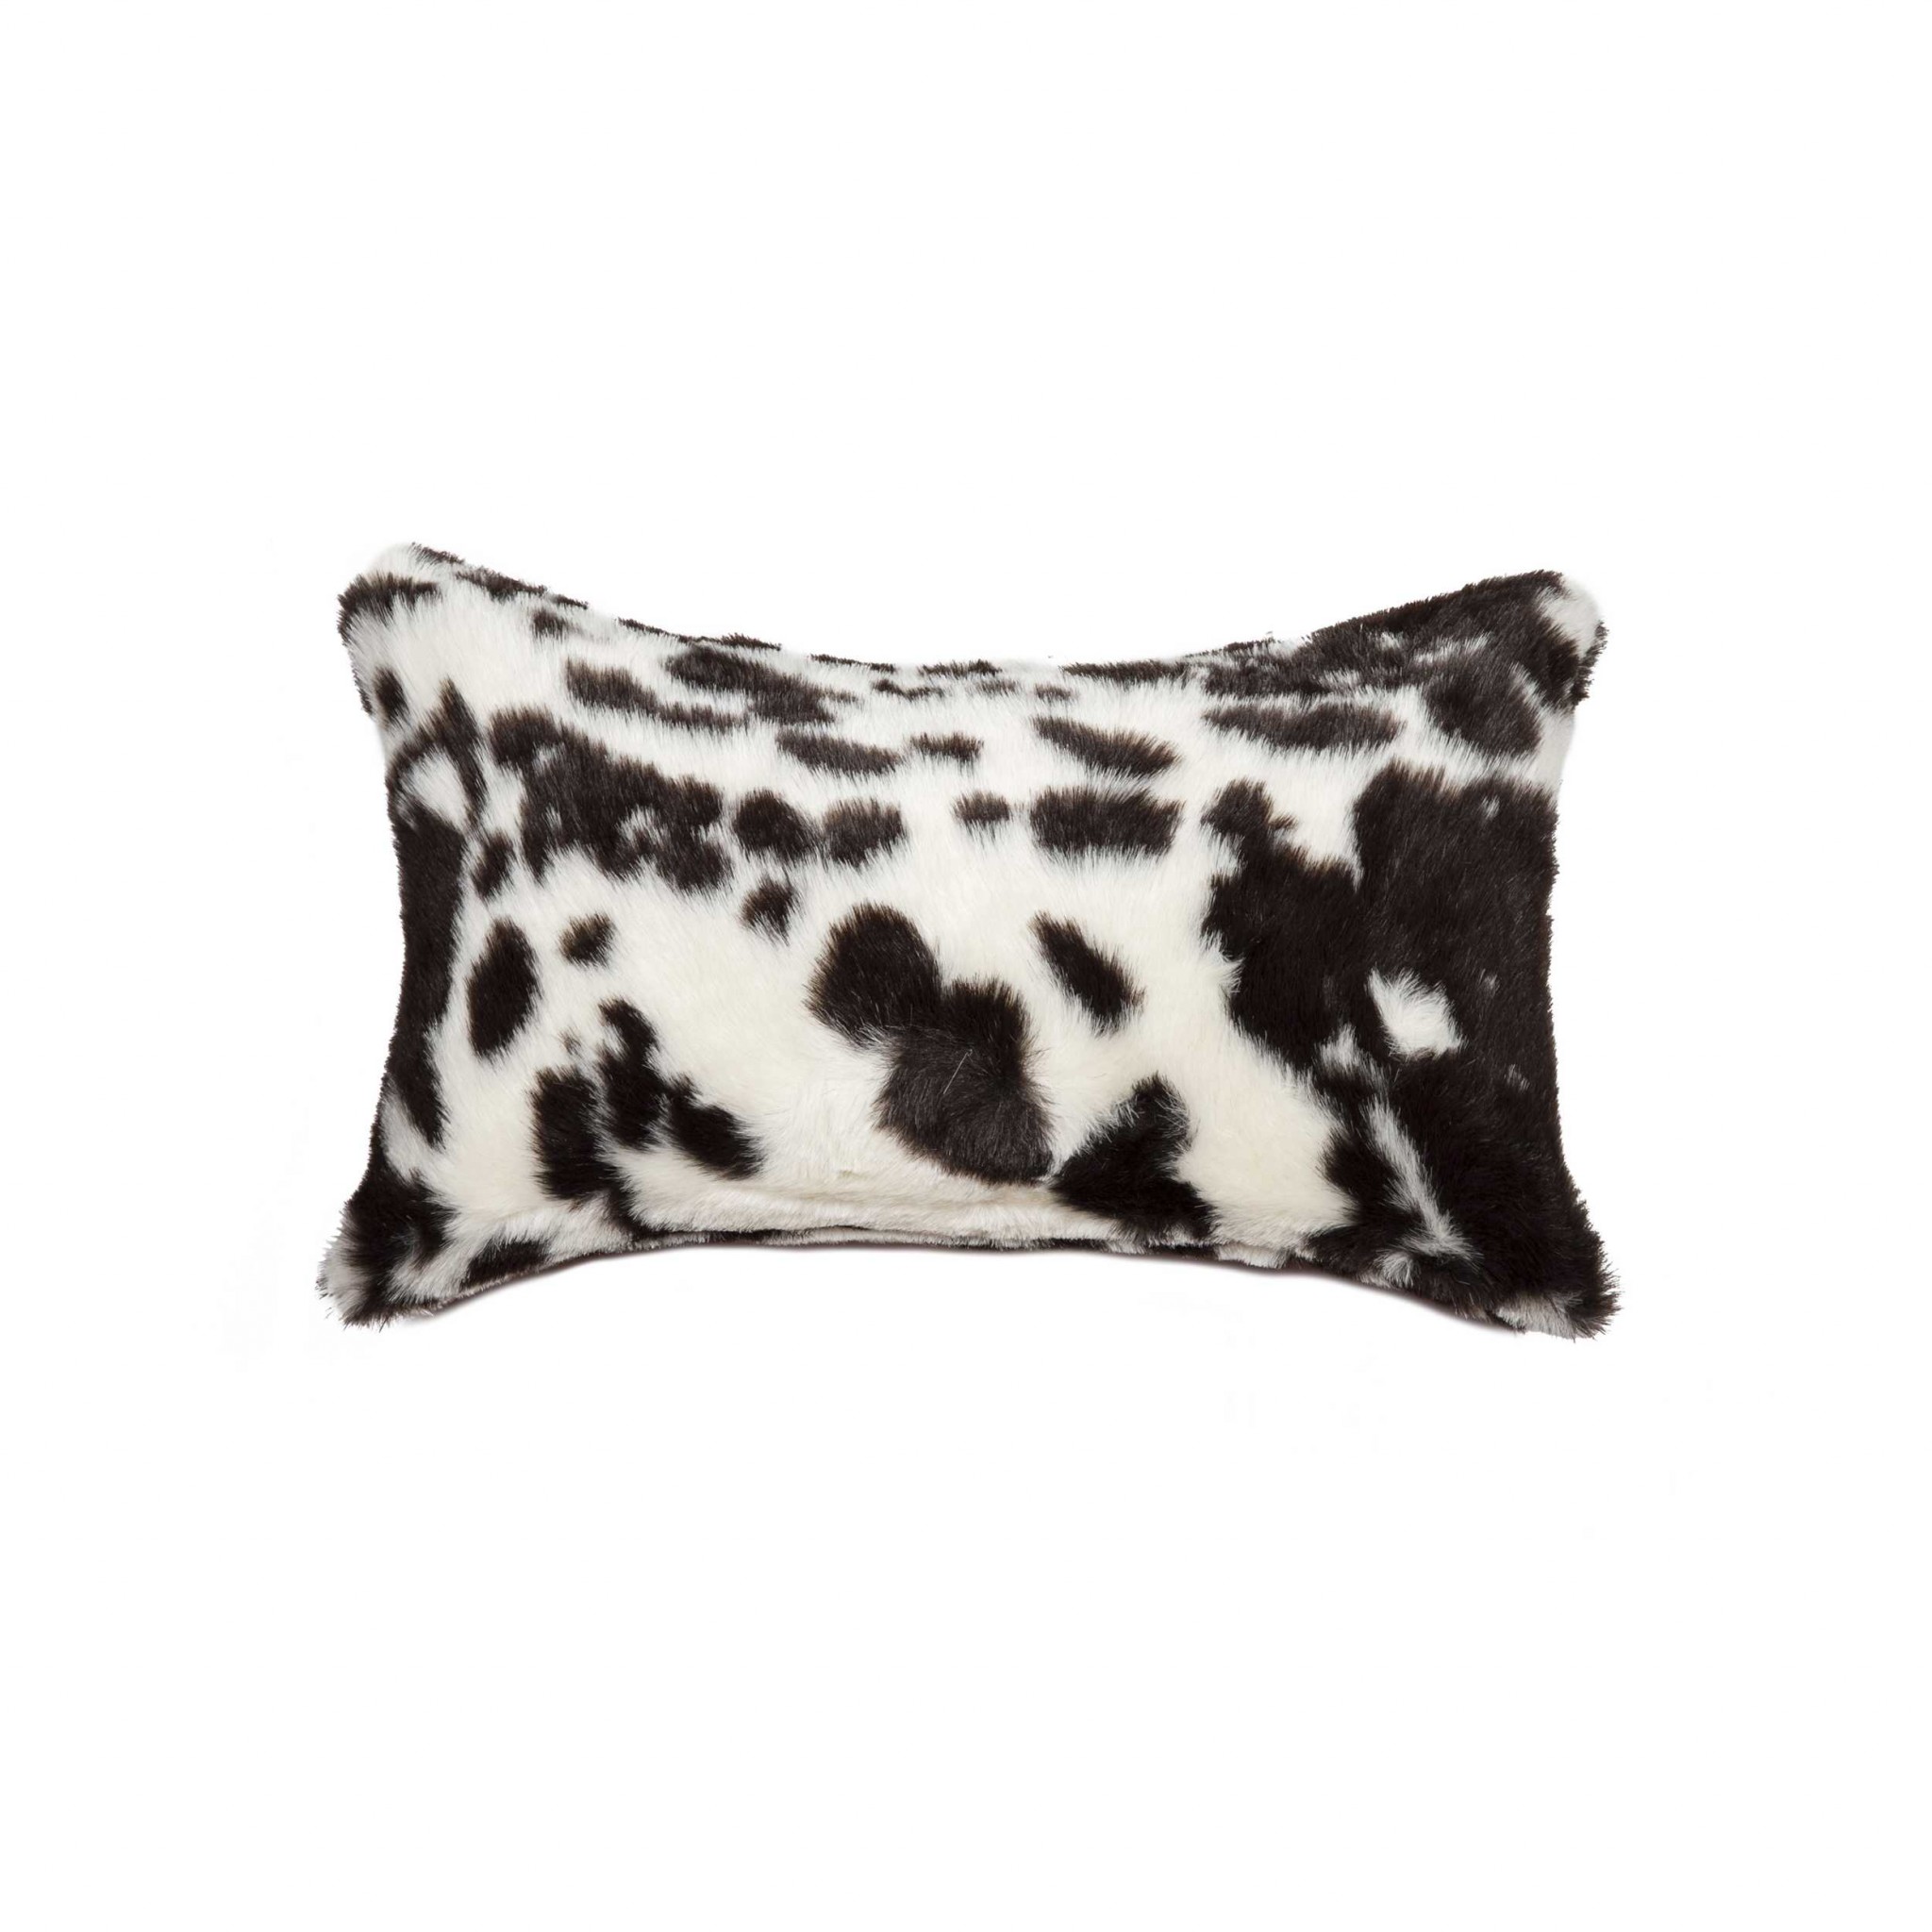 12" x 20" x 5" Brownsville Chocolate And White Faux Fur - Pillow